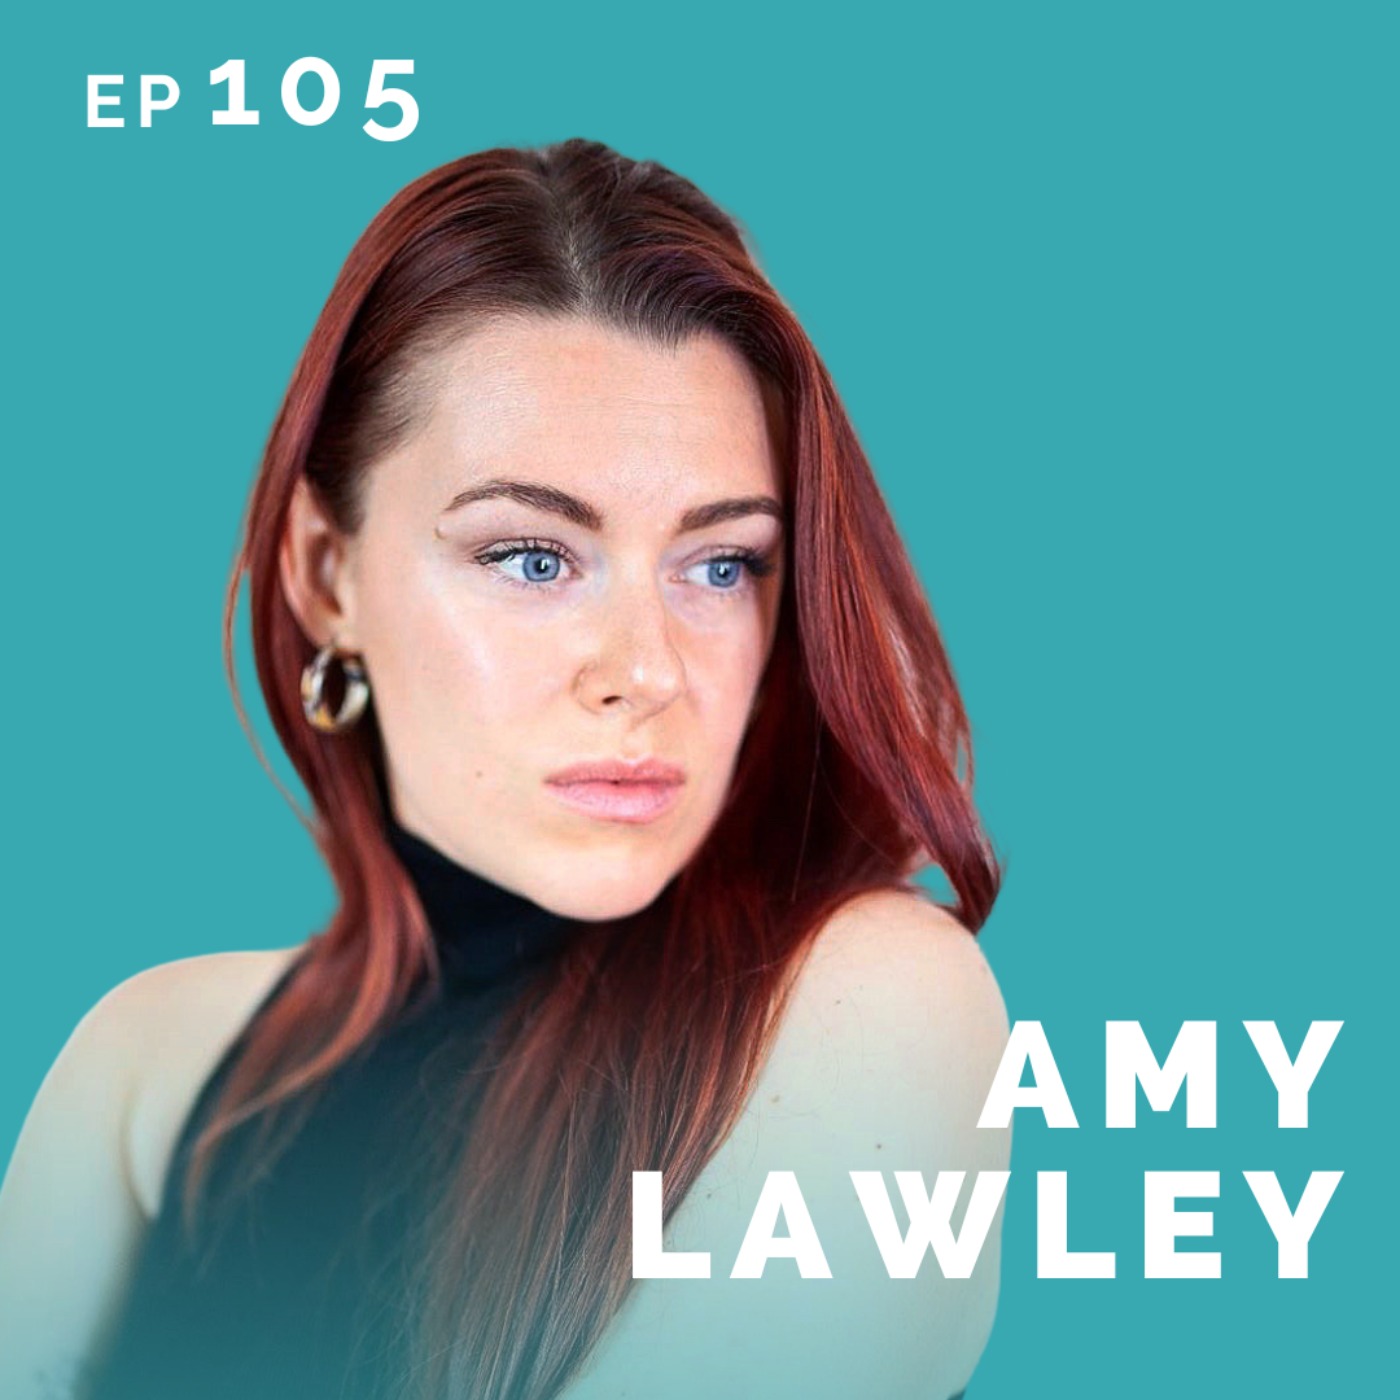 EP 105: Amy Lawley: Sales Executive Turned Actor